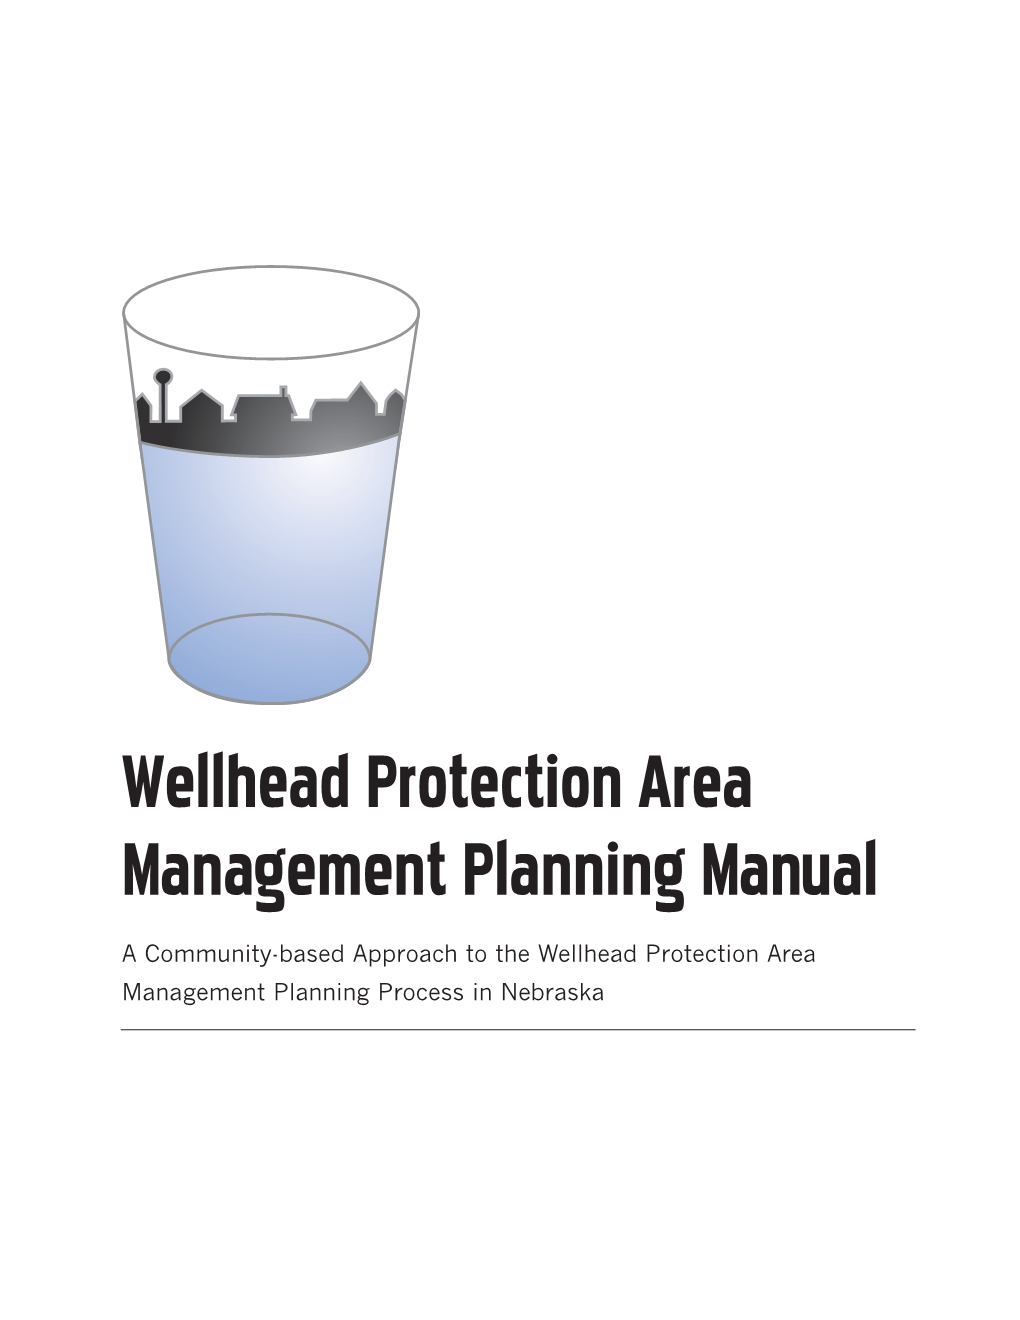 Wellhead Protection Manual.Pmd